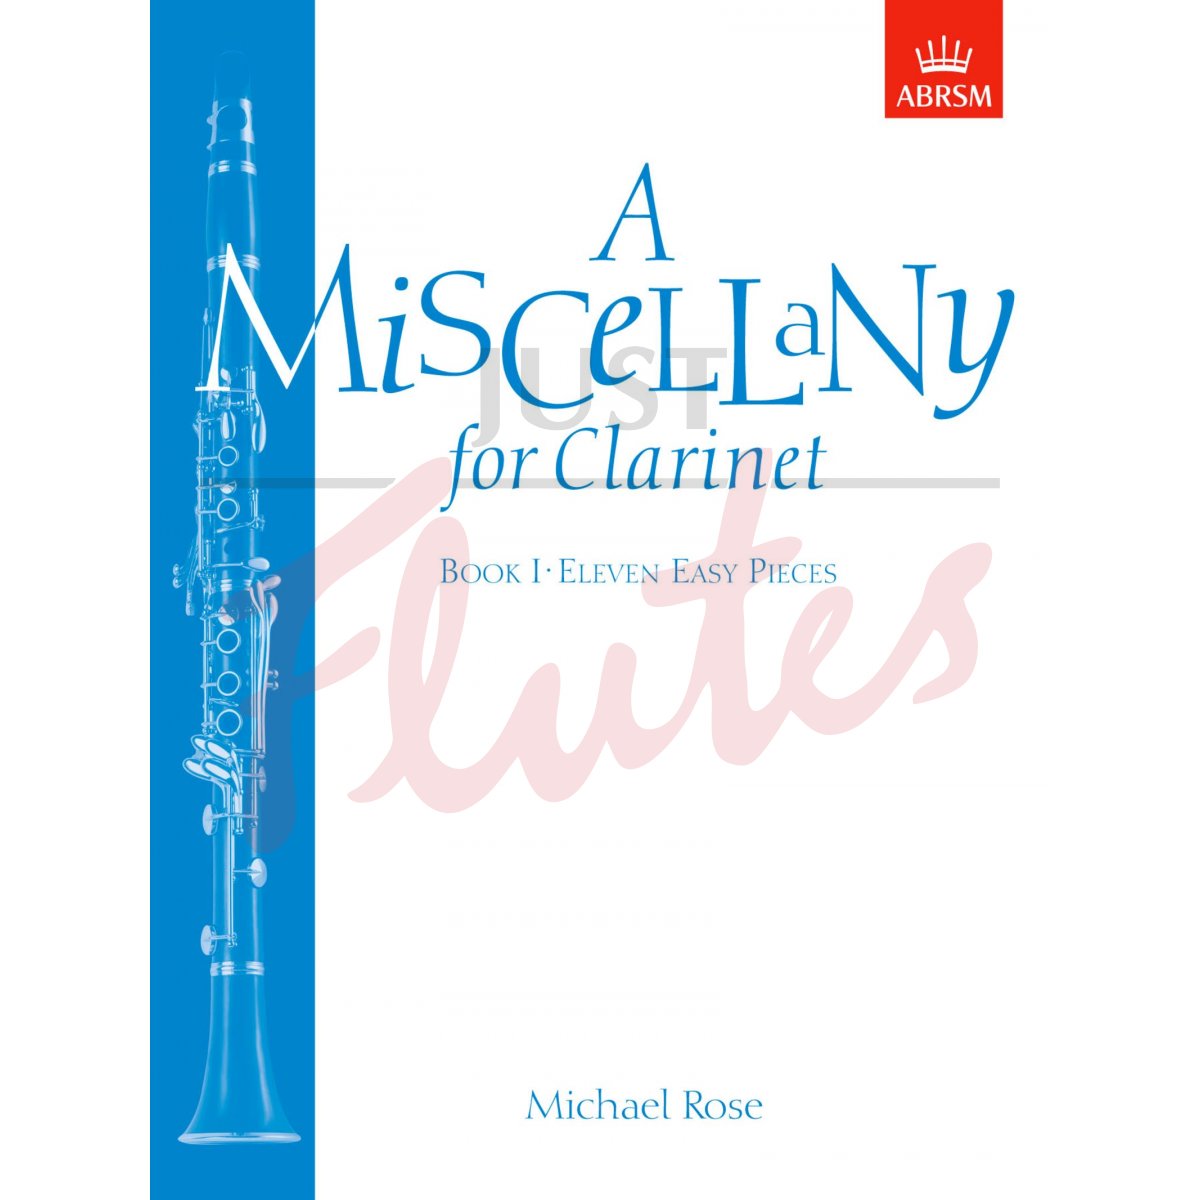 A Miscellany for Clarinet Book 1